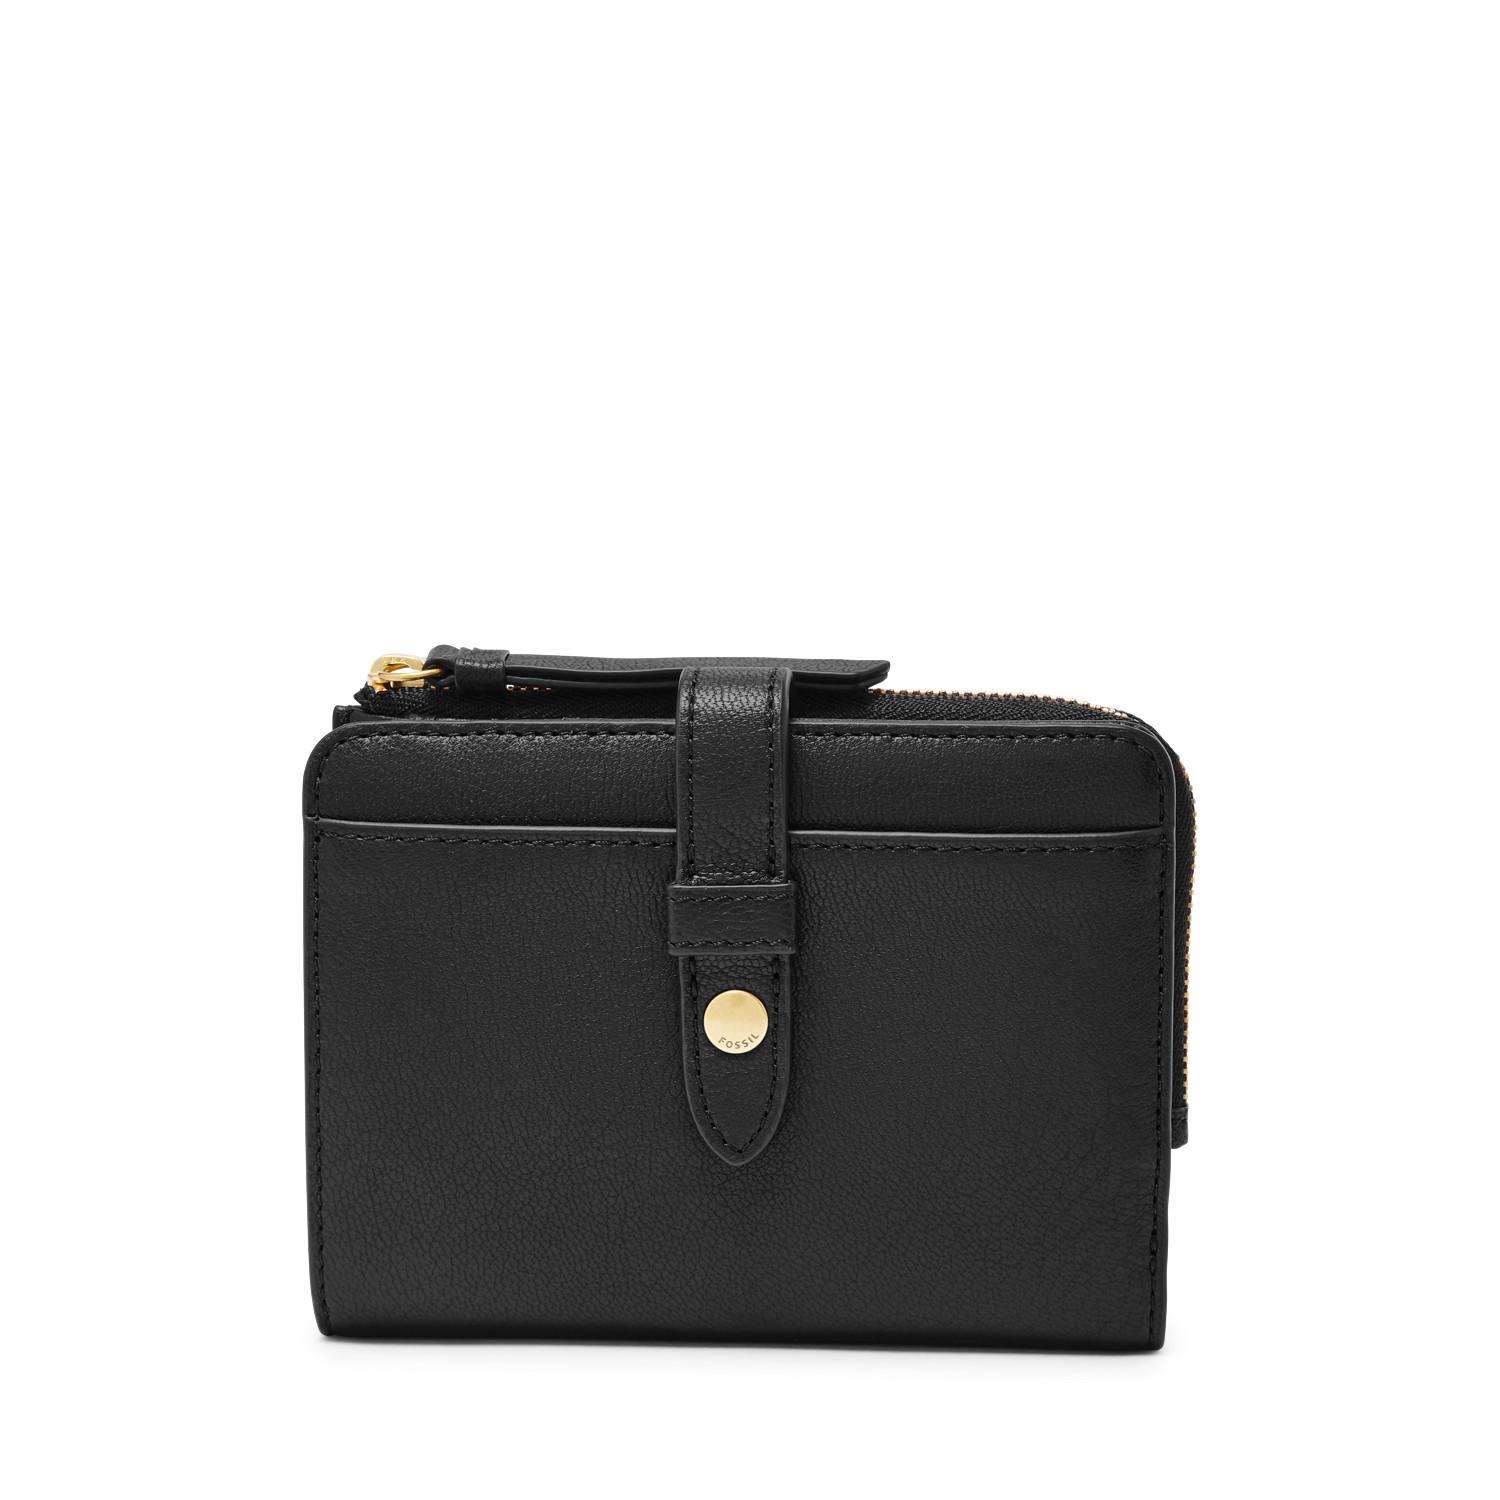 Fossil Fiona Leather Multifunction Wallet in Black/Gold (Black) - Lyst